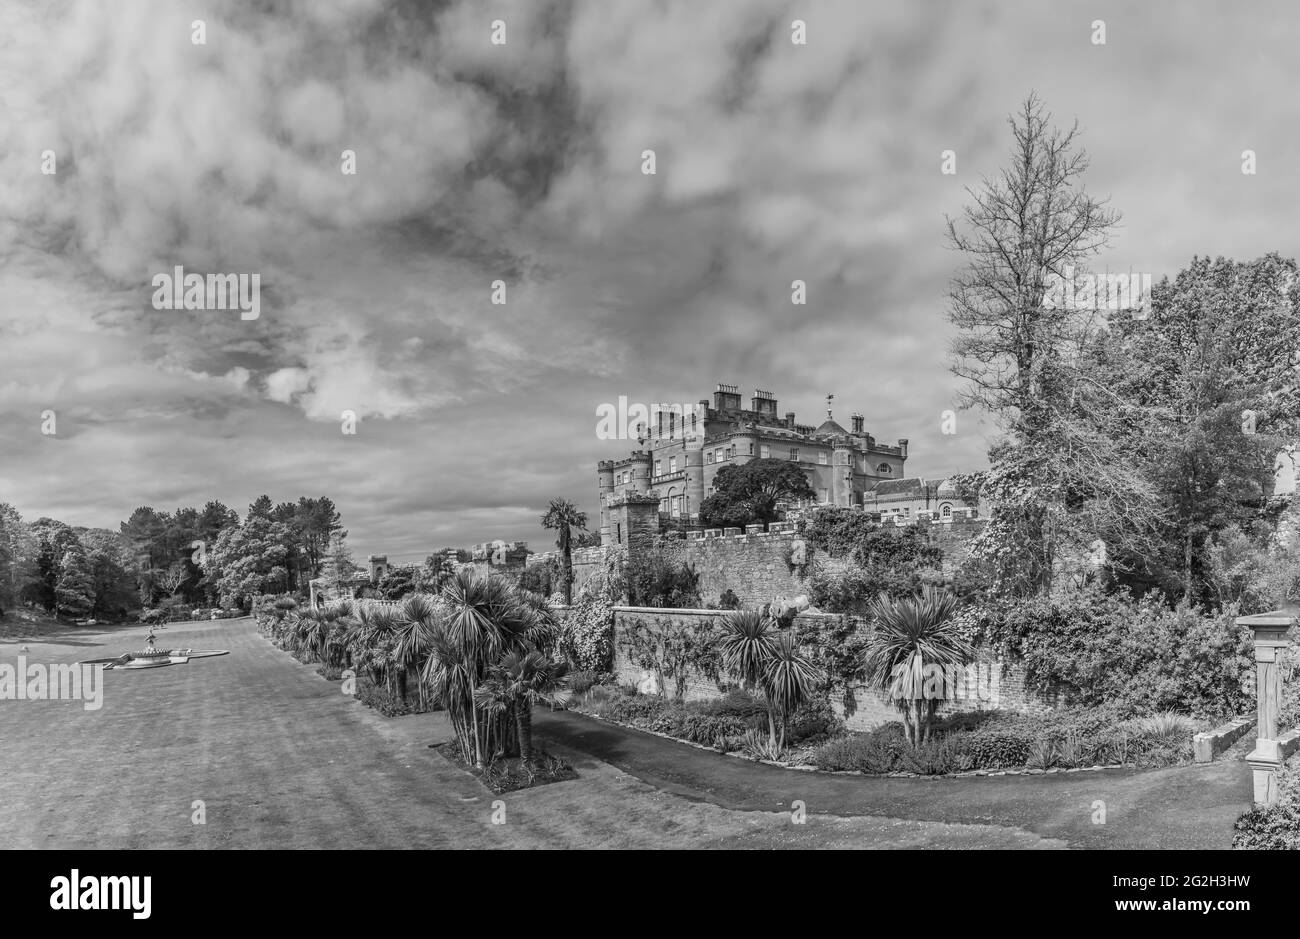 Scotland. Looking towards Culzean Castle from the walled garden and Fountain Court green. Stock Photo